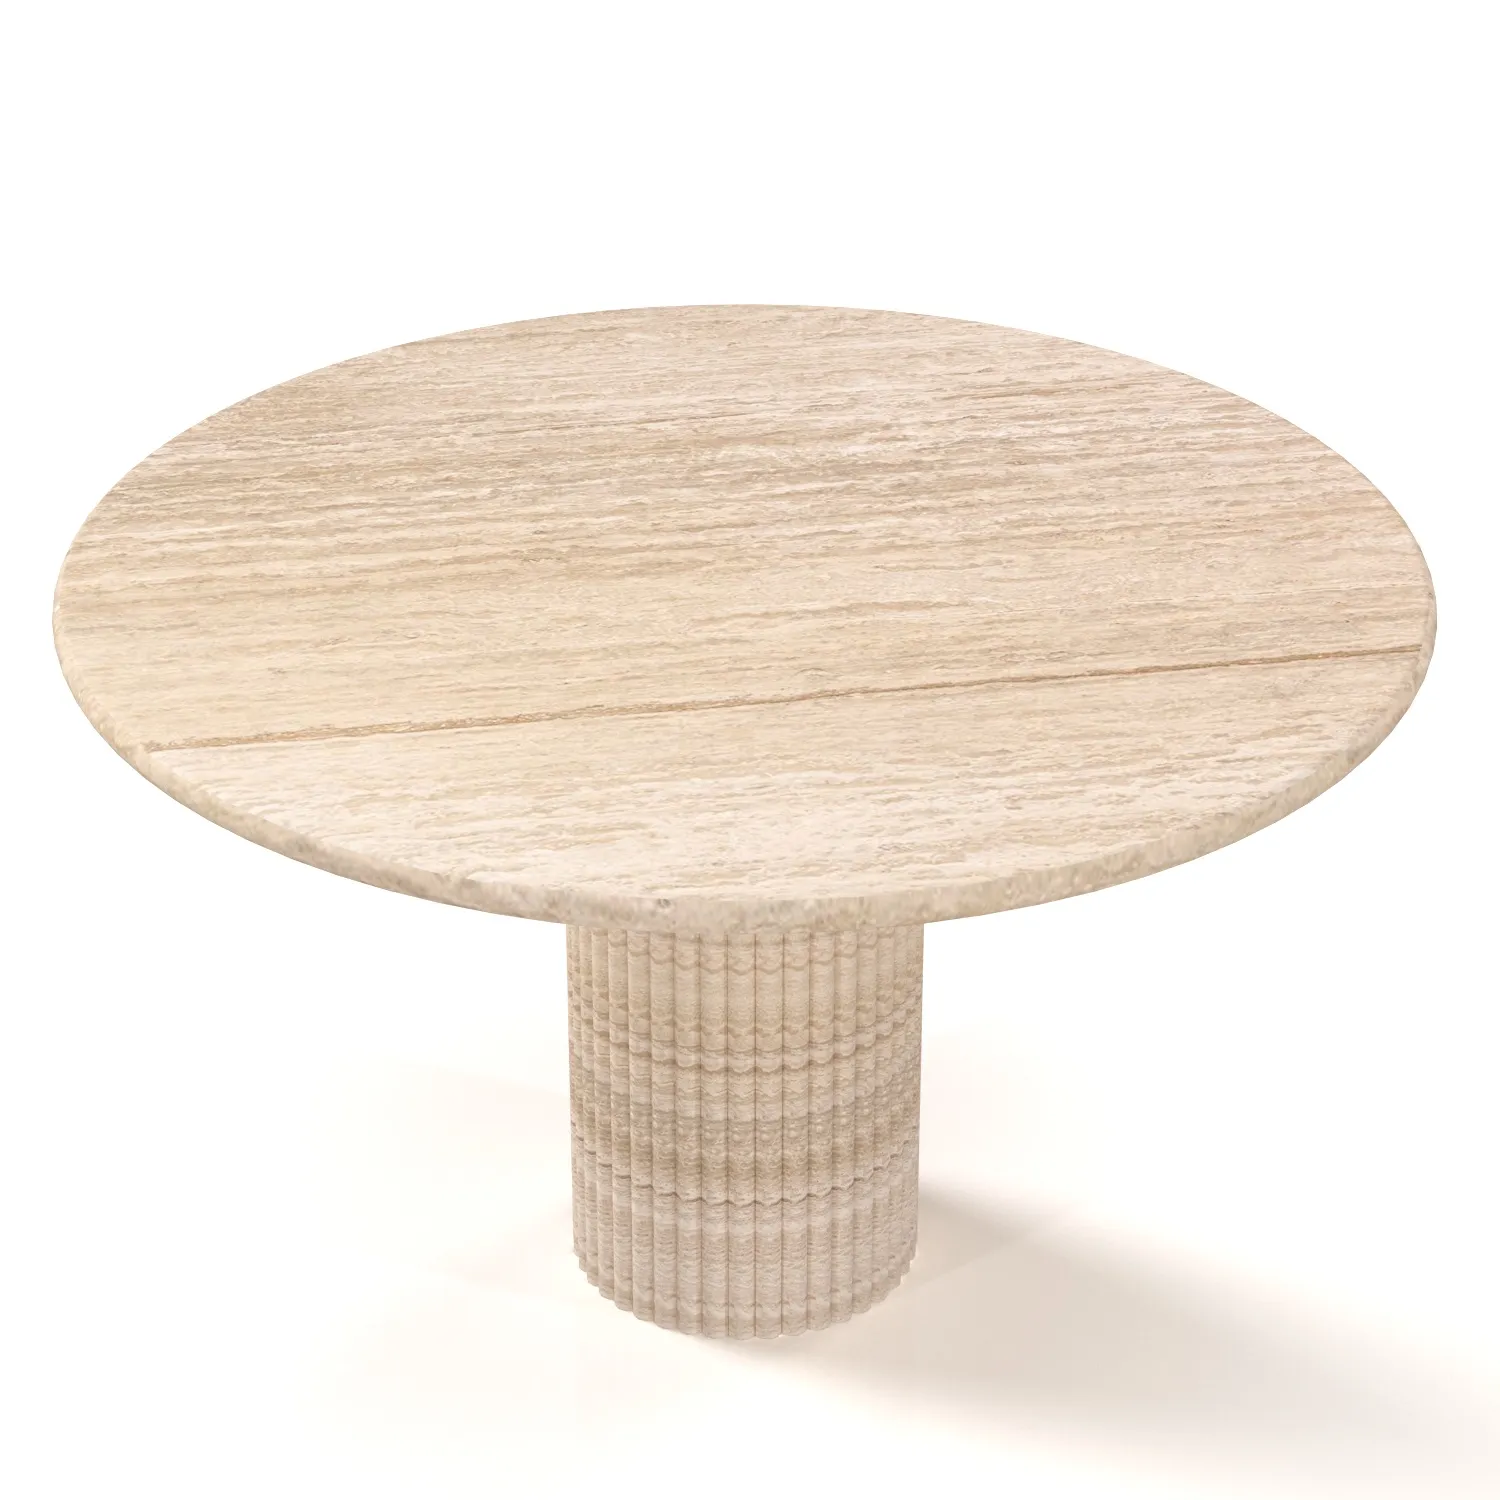 Cava Fluted Round Beige Travertine Dining Table 3D Model_04